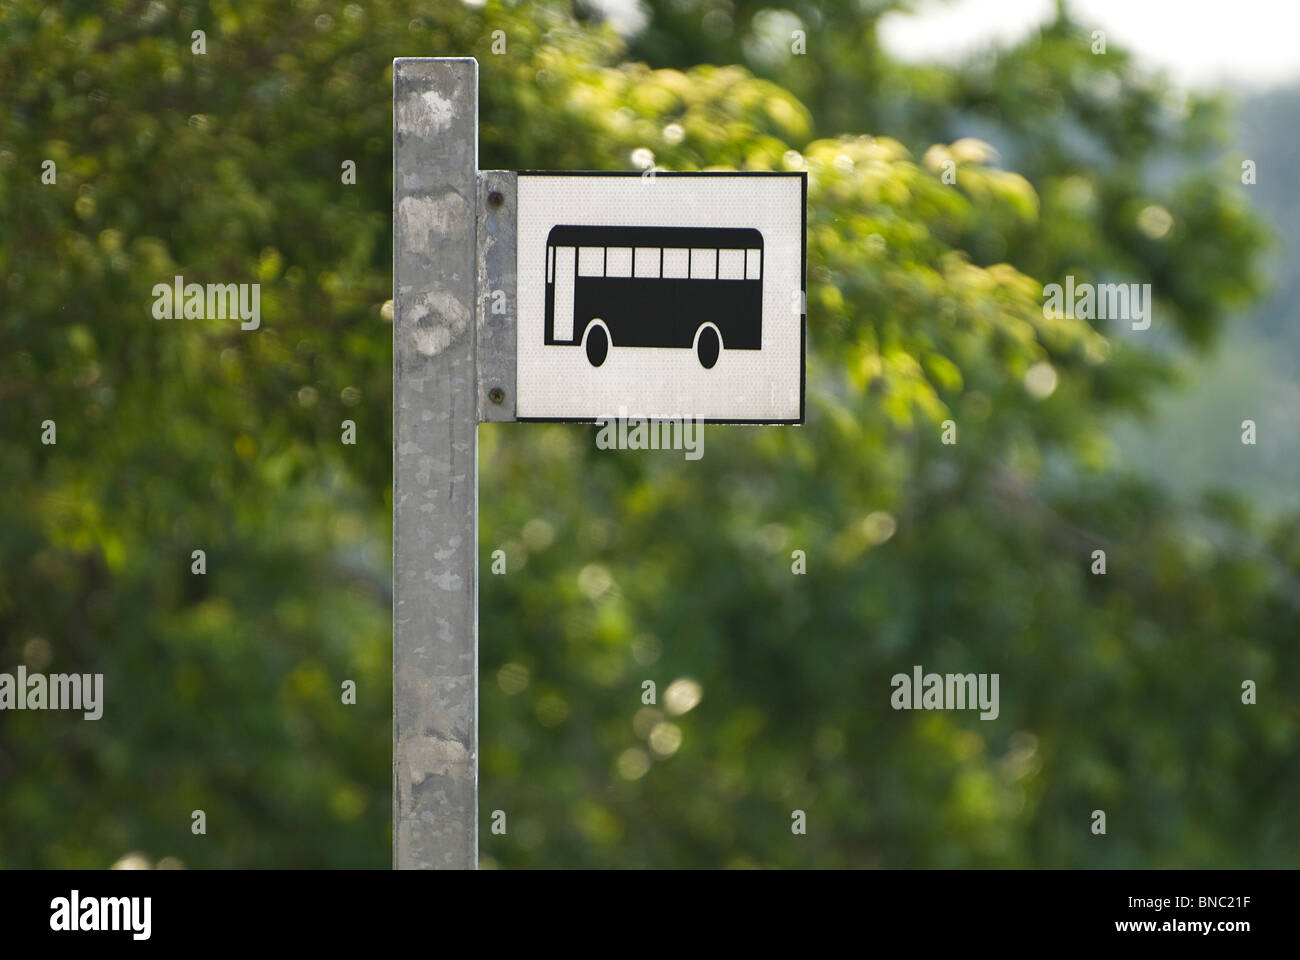 Bus stand sign Stock Photo